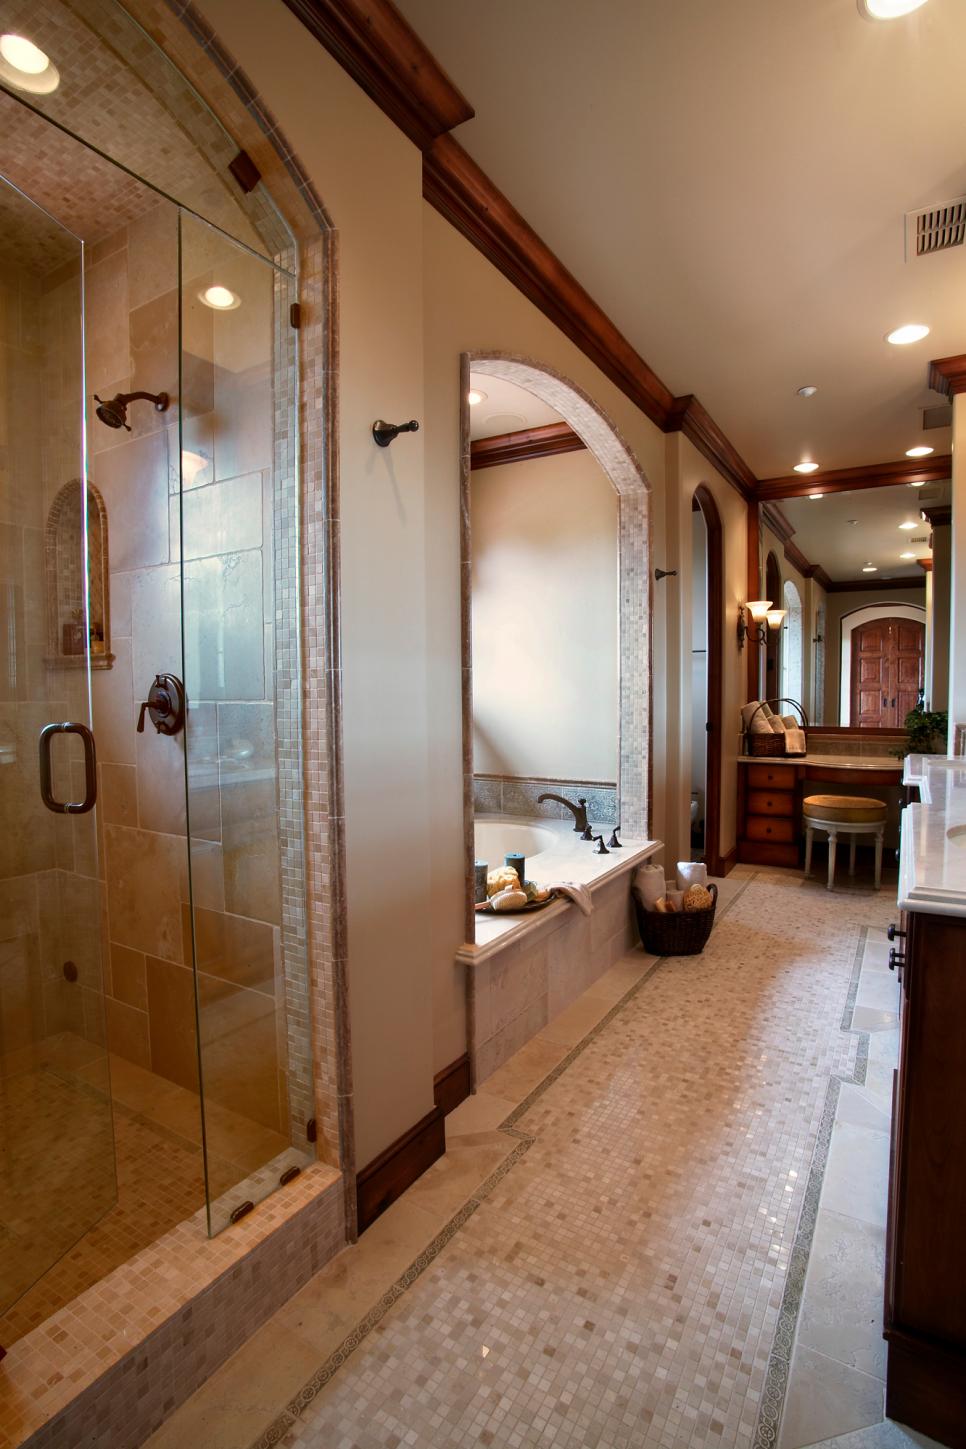 Long Master Bathroom With Small Tile Floor, Glass Door Shower and